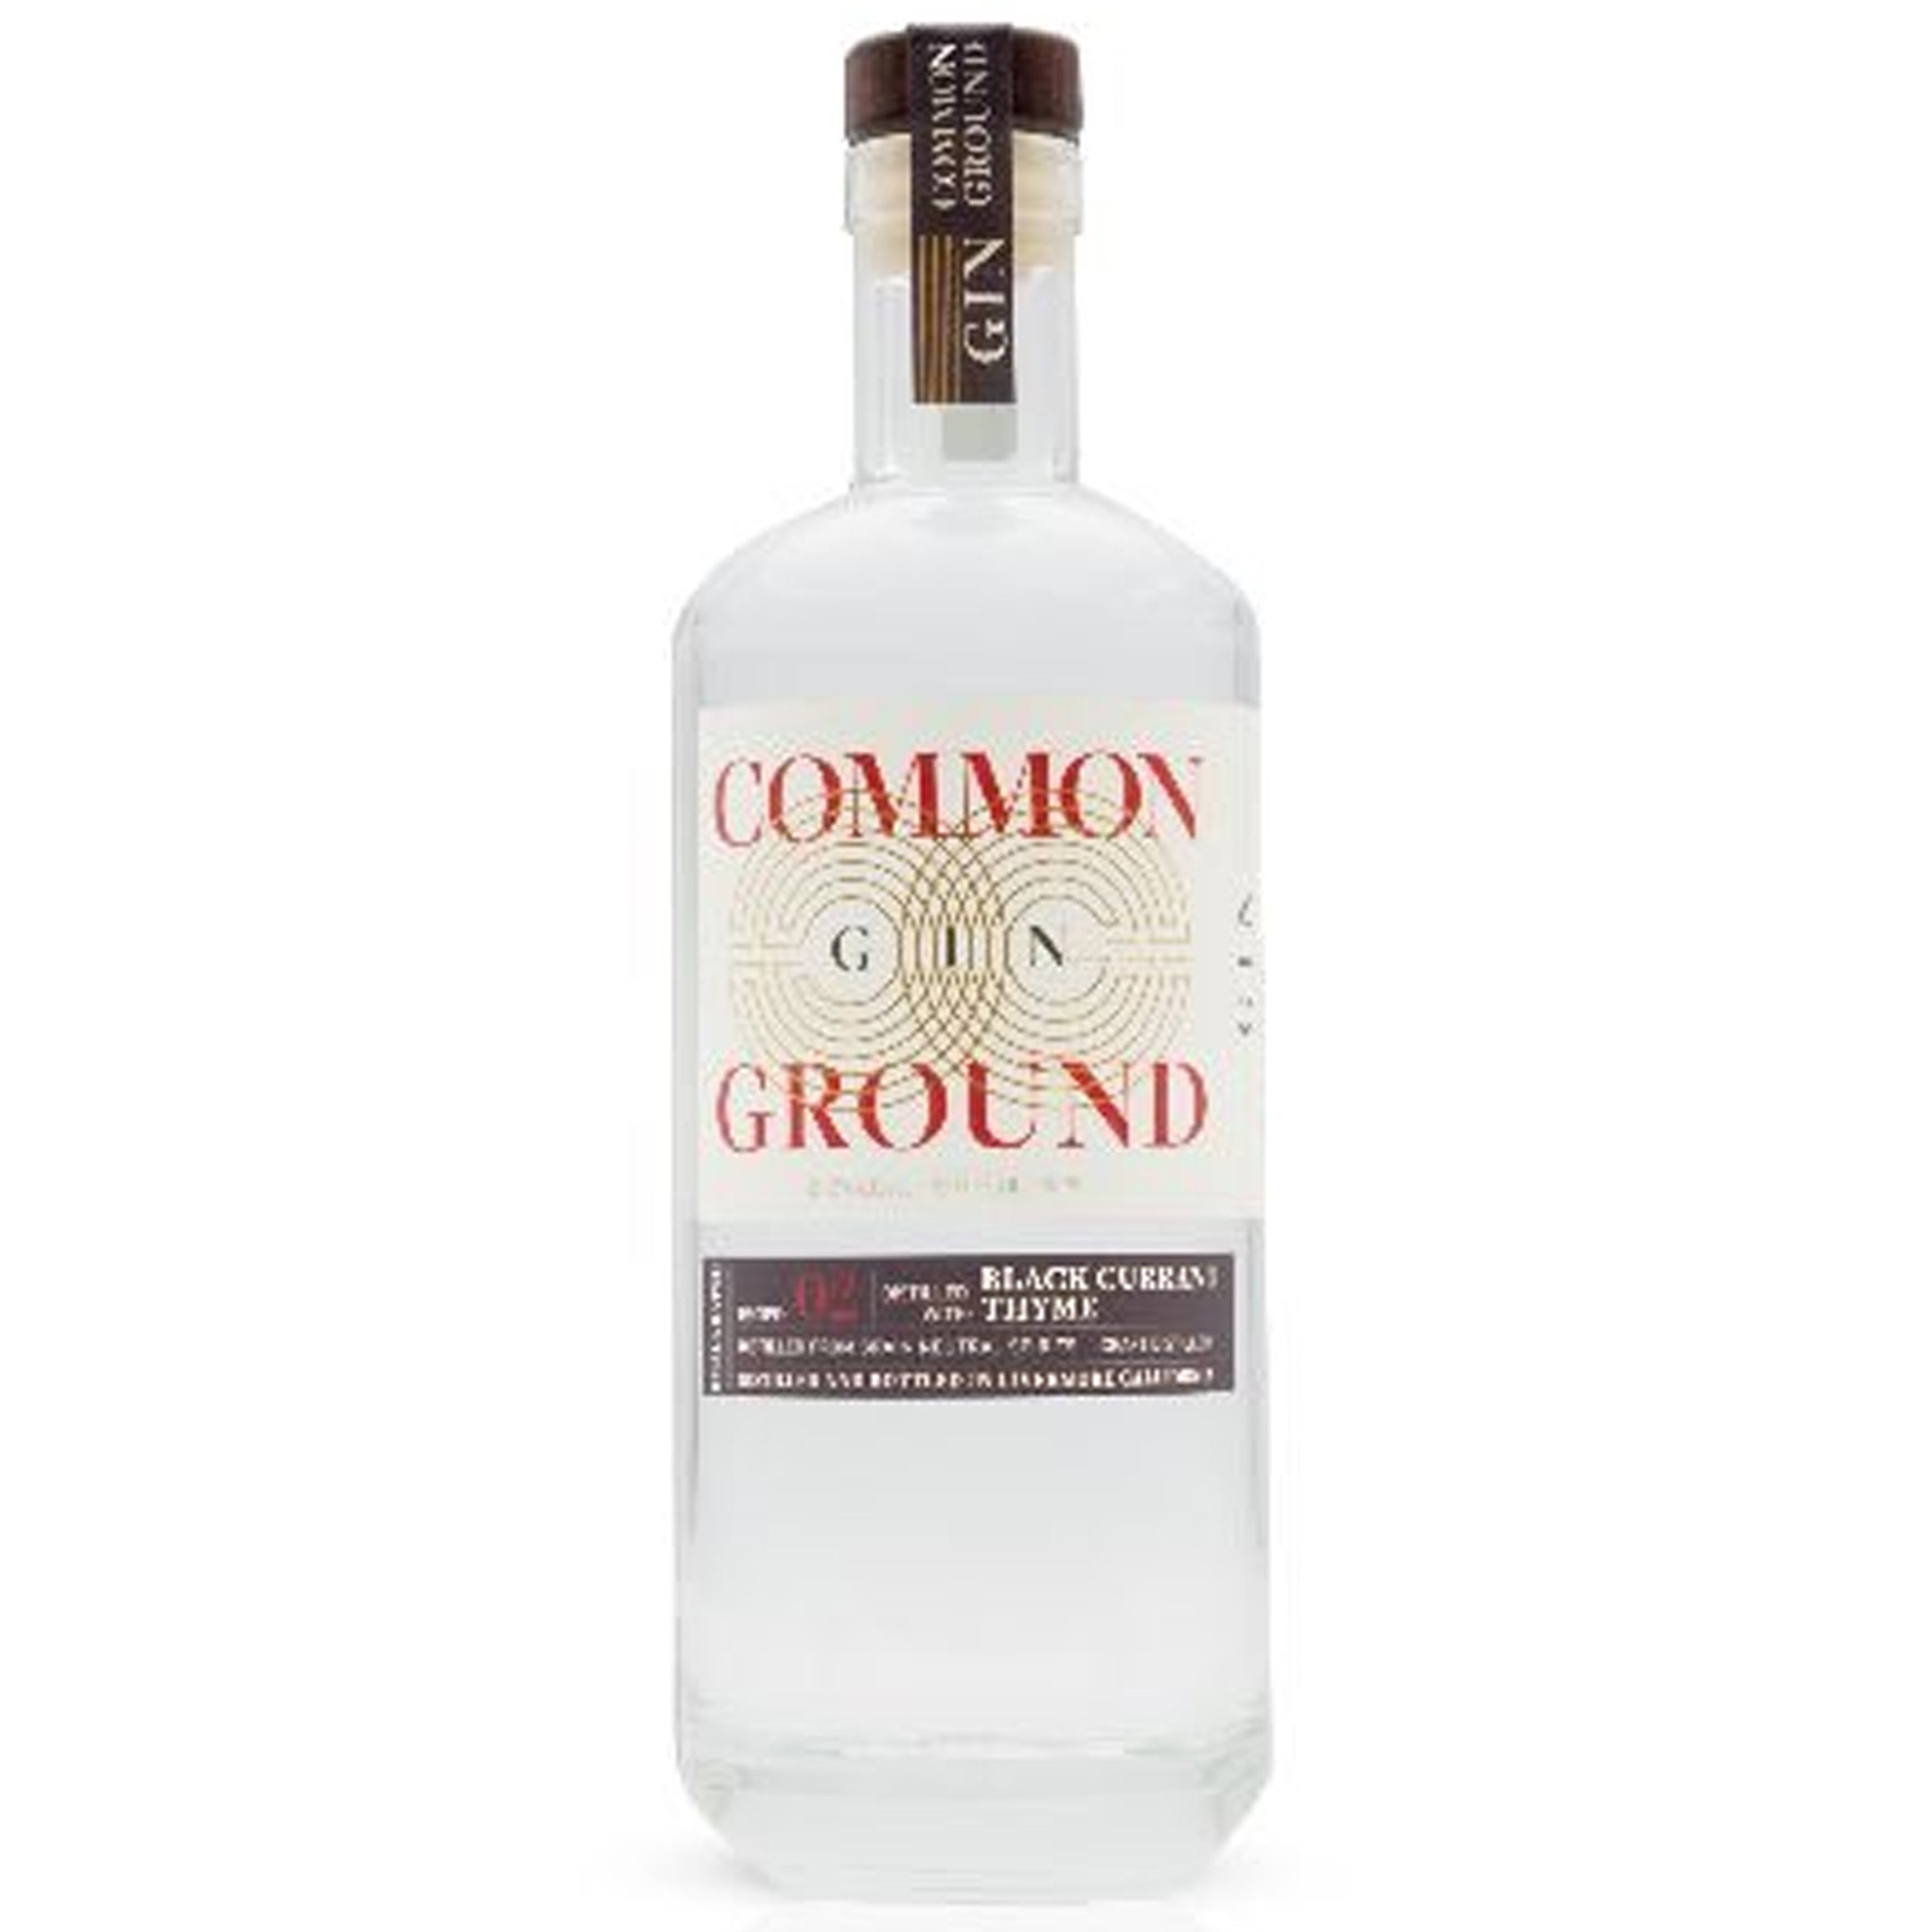 Common Ground Black Currant & Thyme Gin